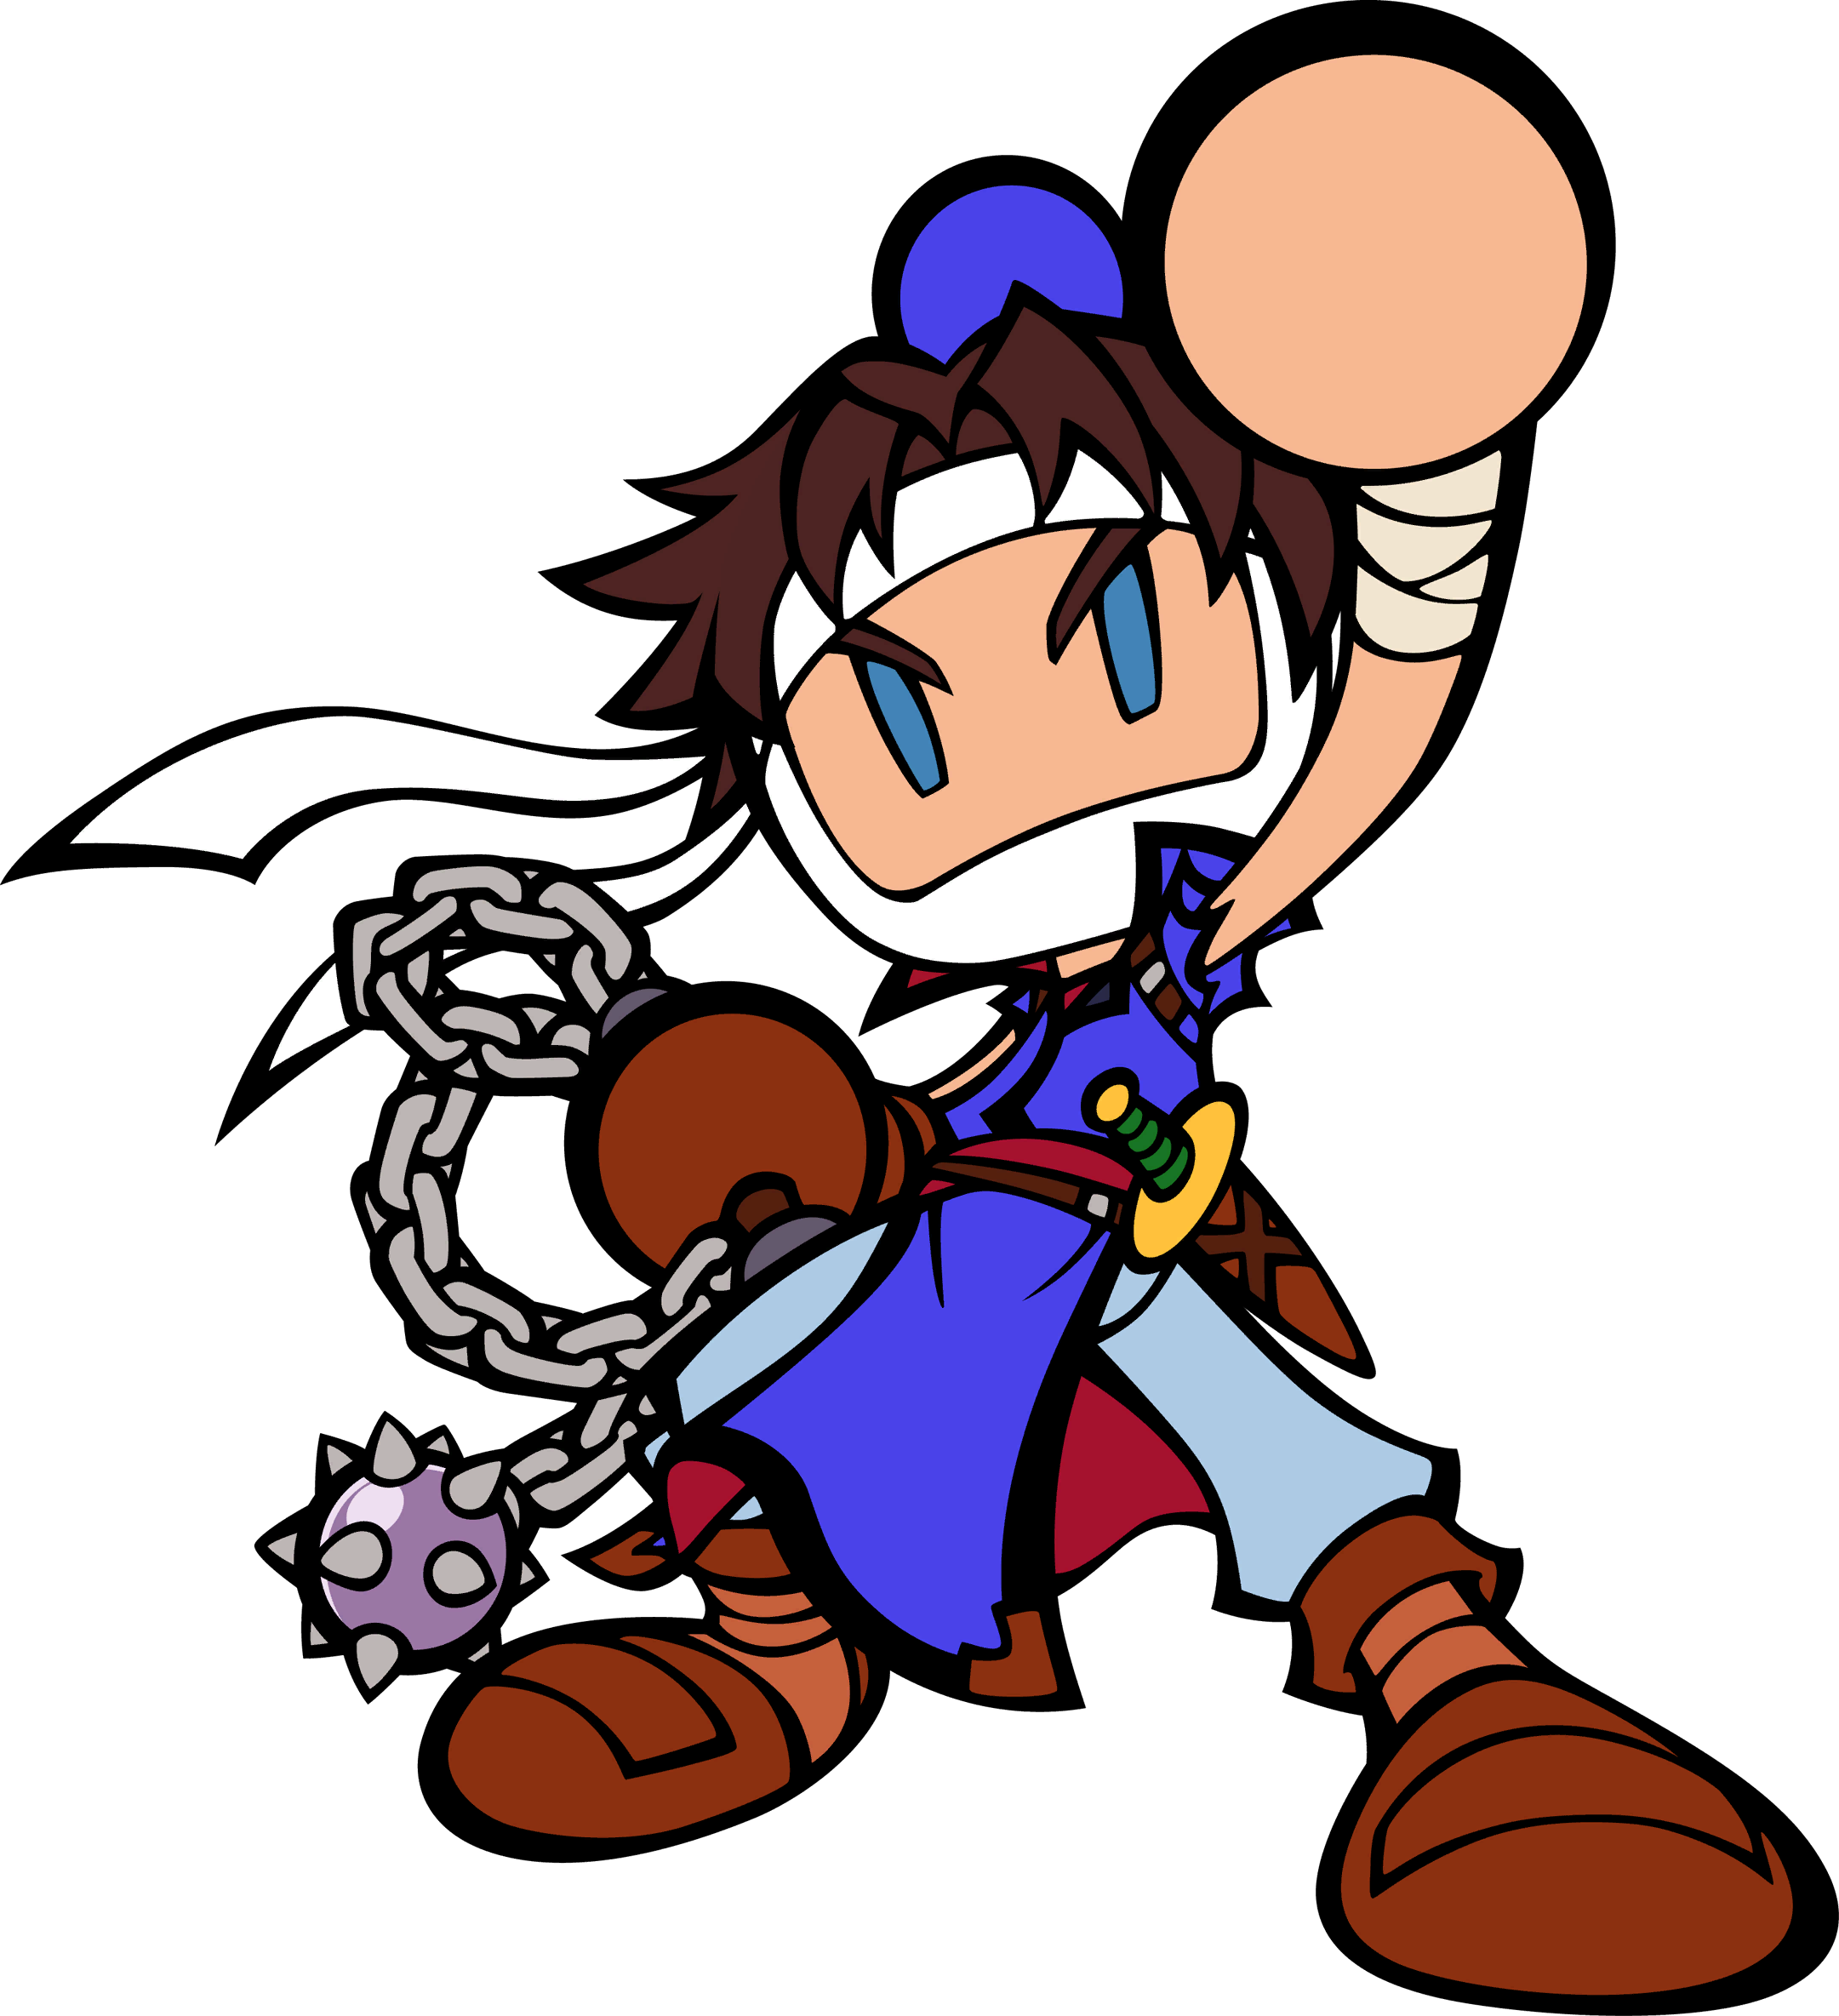 Richter Belmont, Video Game Characters Wiki